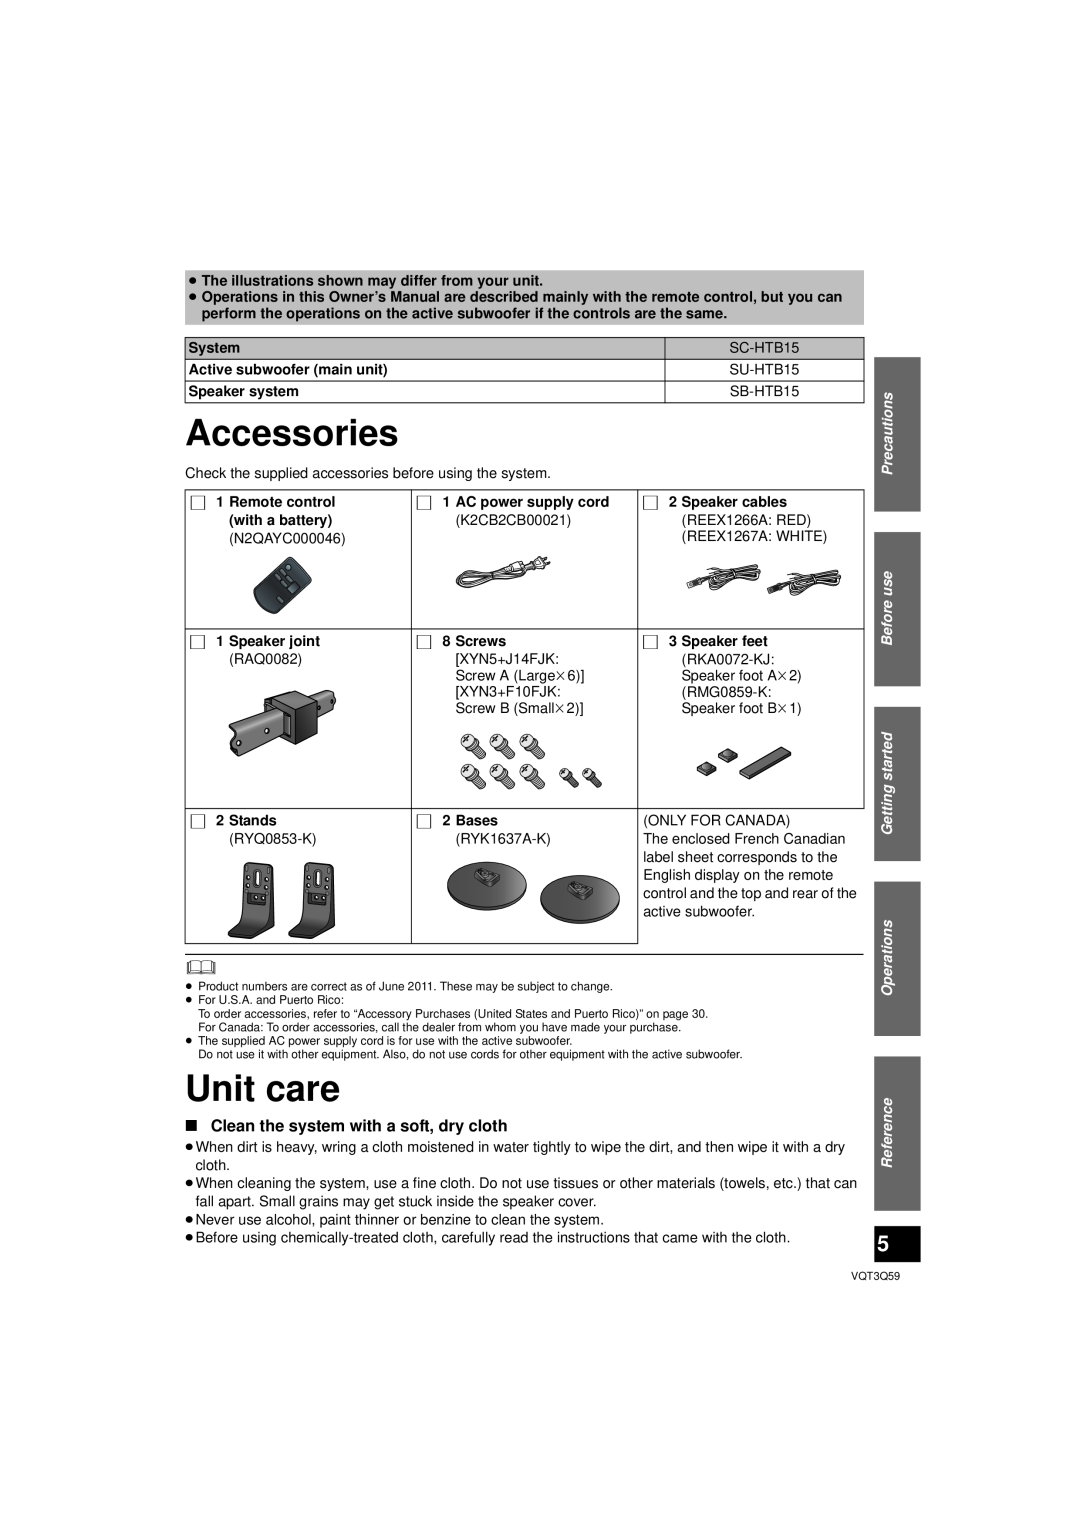 Panasonic SC-HTB15 Accessories, Unit care, Clean the system with a soft, dry cloth, System, Active subwoofer main unit 